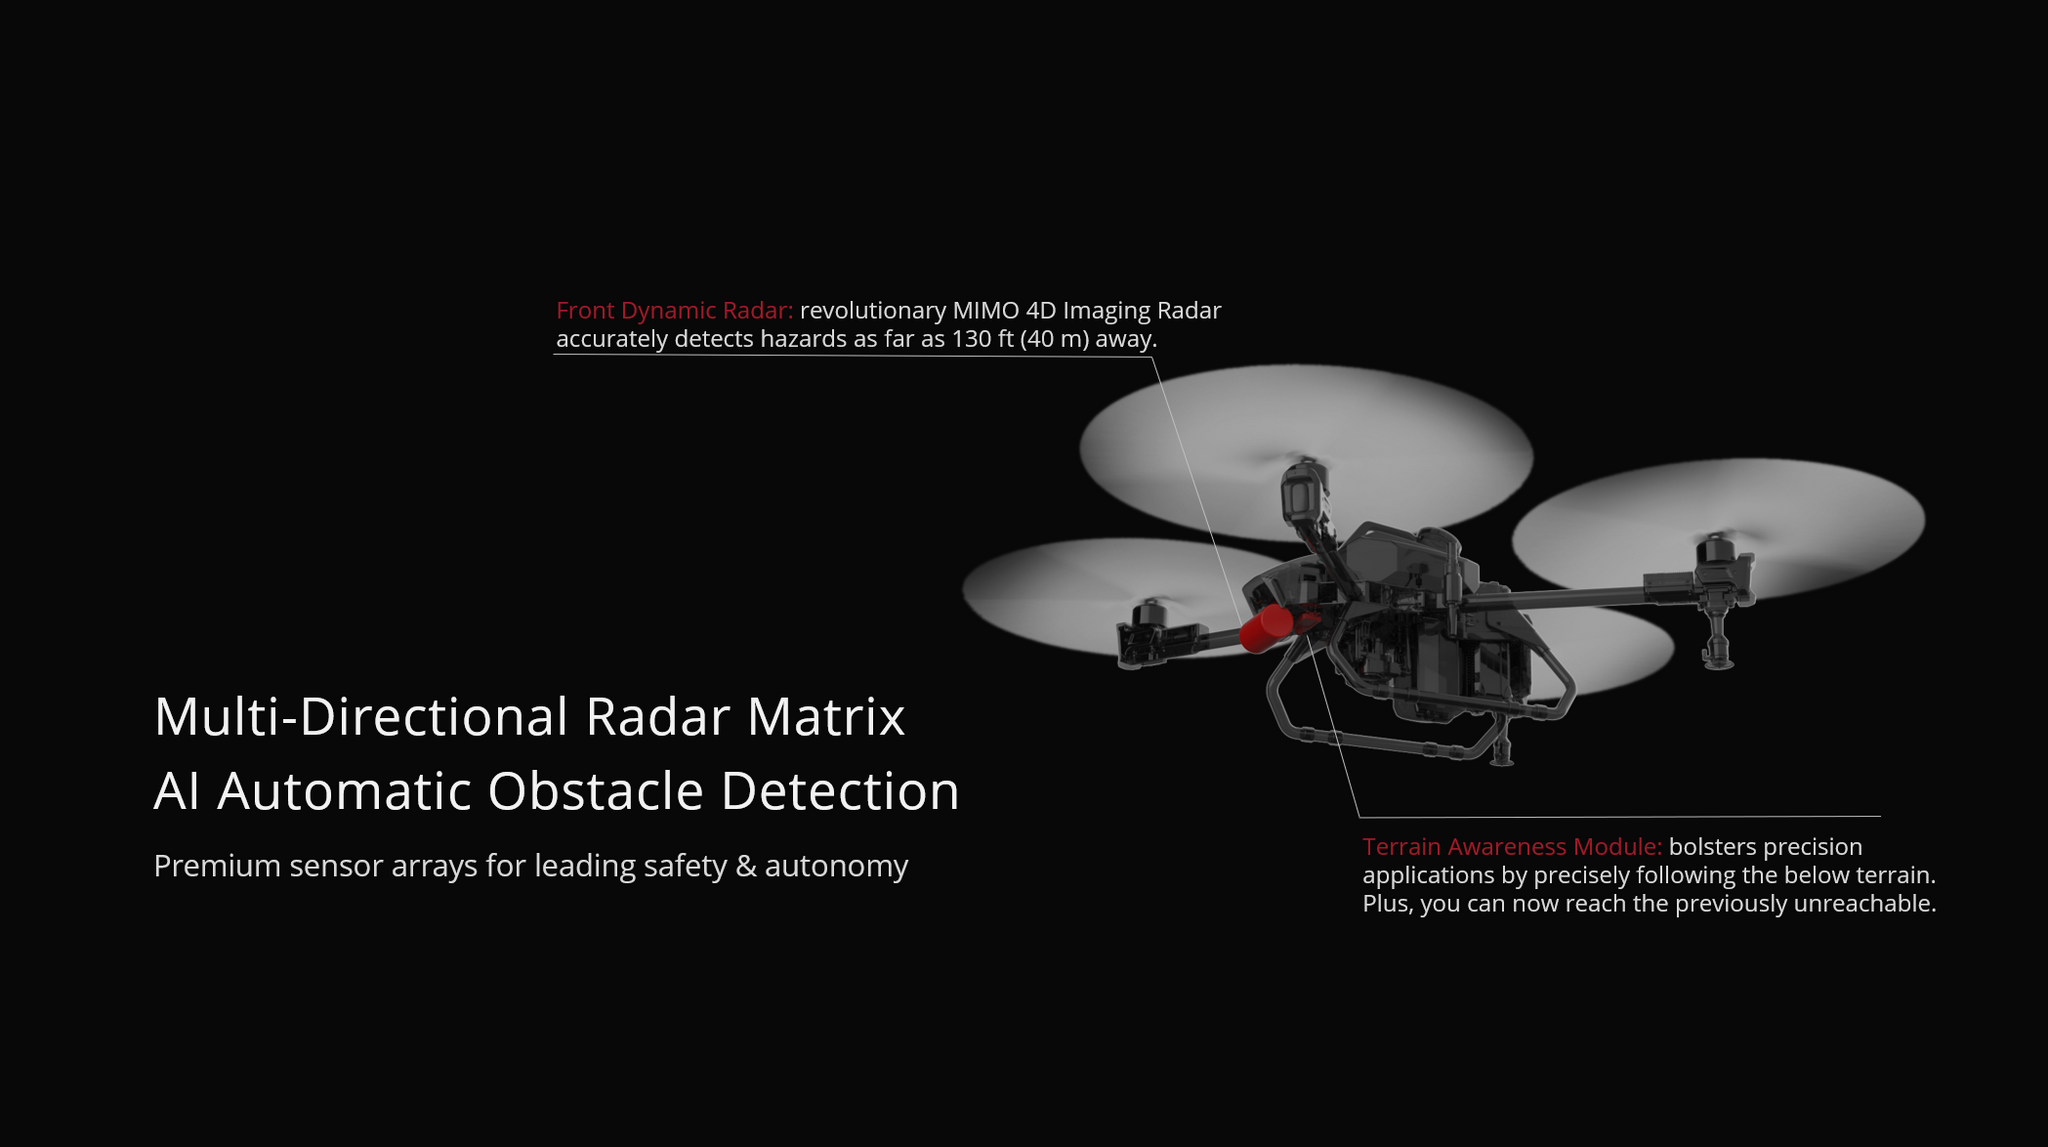 XAG P40 20L Agriculture Drone, MIMO 4D Imaging Radar accurately detects hazards as far as 130 ft (